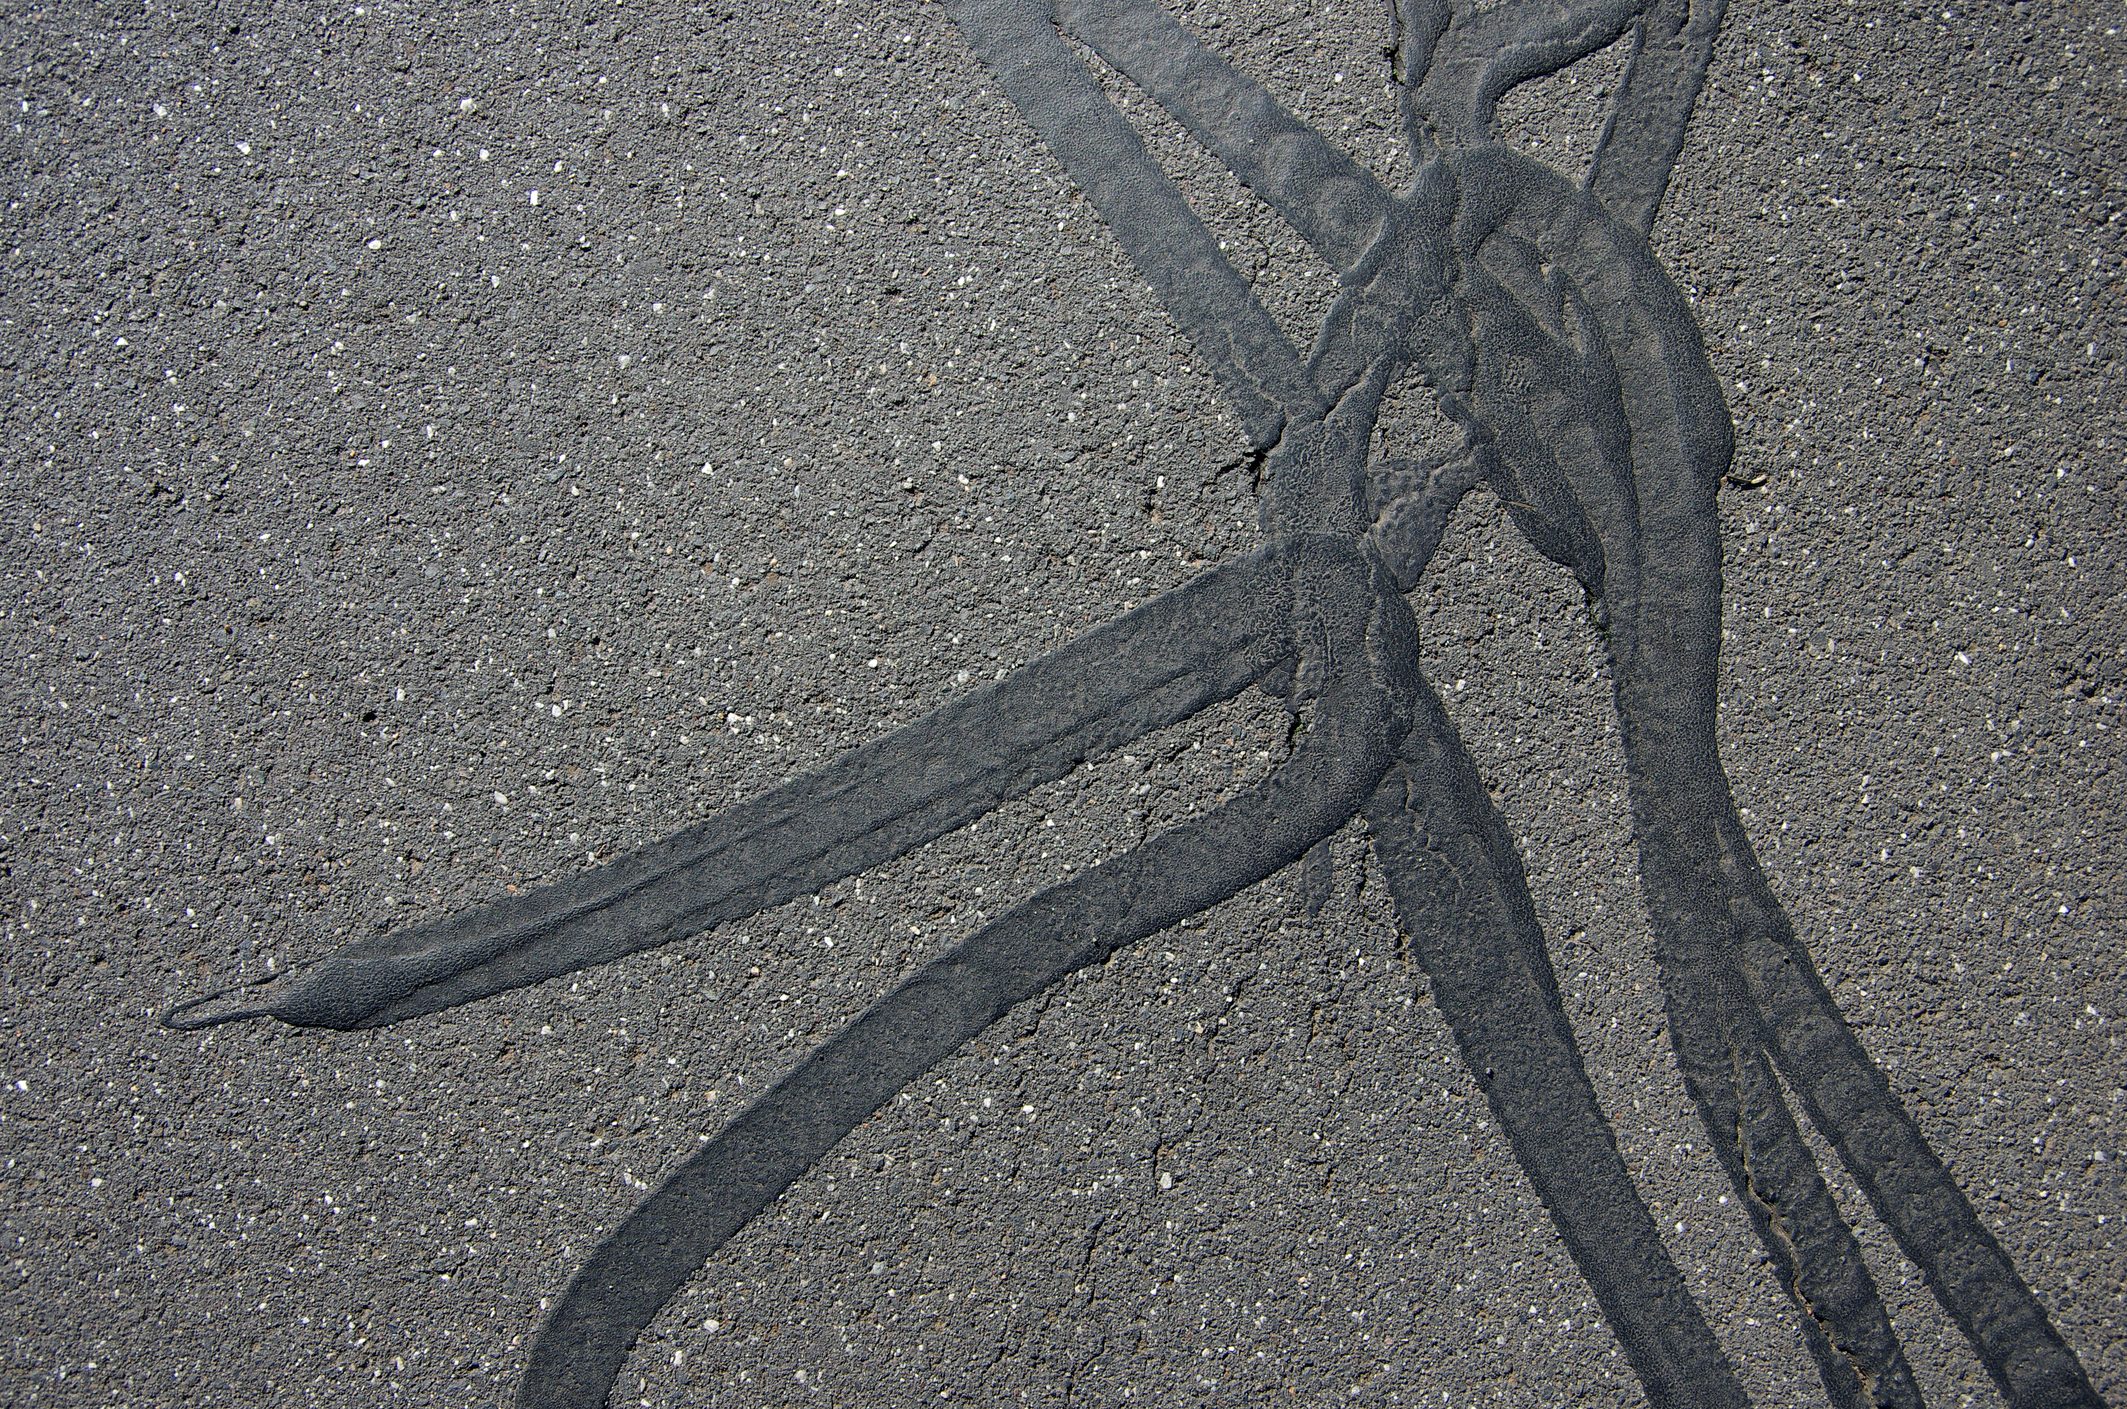 Asphalt footpath where cracks have been repaired with liquid bitumen